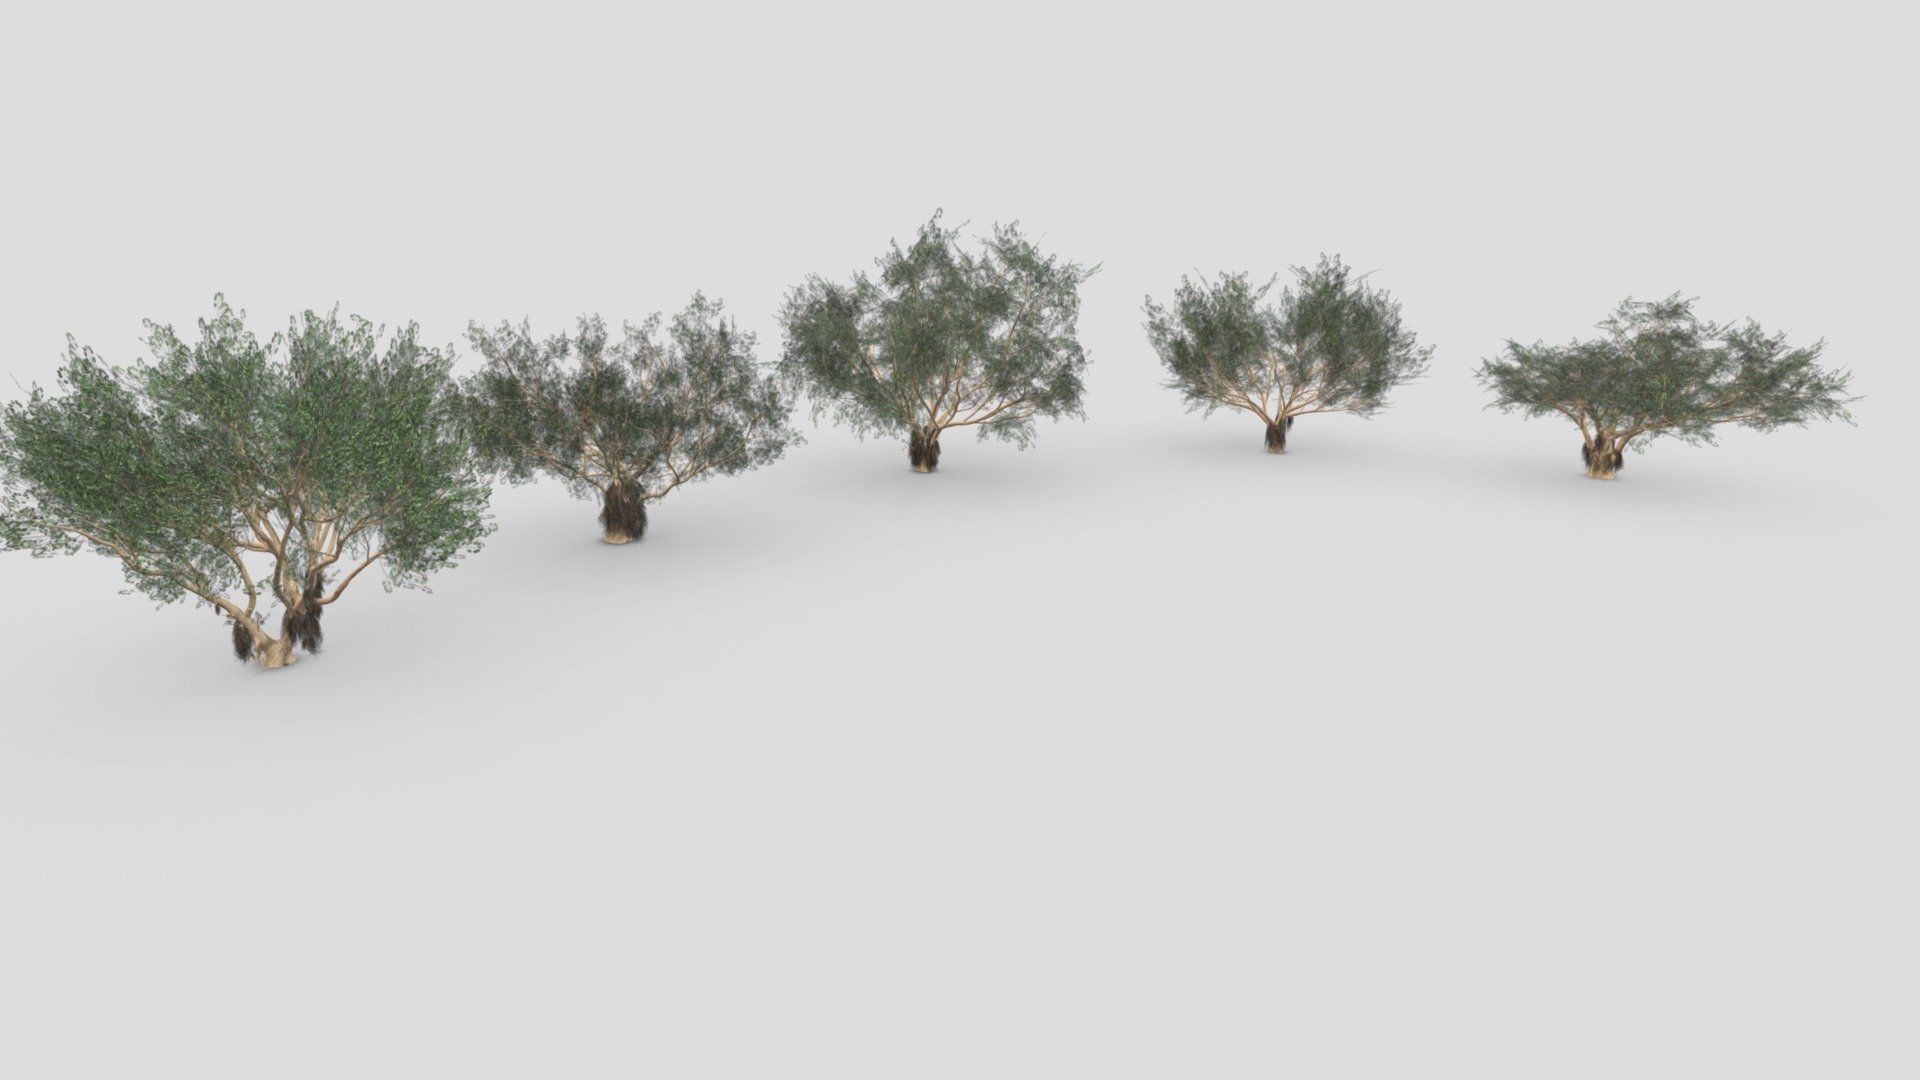 This file includes a collection of 5 3D Models of the Ficus Benjamina Tree.

Ficus Benjamina Tree-S01: https://sketchfab.com/3d-models/ficus-benjamina-tree-s01-e28b83ee50784f81b3aabd51bb747ab2

Ficus Benjamina Tree-S02: https://sketchfab.com/3d-models/ficus-benjamina-tree-s02-949196767aed4343a73714c5e43c313a

Ficus Benjamina Tree-S03: https://sketchfab.com/3d-models/ficus-benjamina-tree-s03-a477ce1b4e7f4d0fb511380017642e9c

Ficus Benjamina Tree-S04: https://sketchfab.com/3d-models/ficus-benjamina-tree-s04-dff27720b6f54590b8935ee899c68f60

Ficus Benjamina Tree-S05: https://sketchfab.com/3d-models/ficus-benjamina-tree-s05-85b146baa6154b809ae2d06142eb2f69 - Ficus Benjamina Tree- Pack 01 - Buy Royalty Free 3D model by ASMA3D 3d model